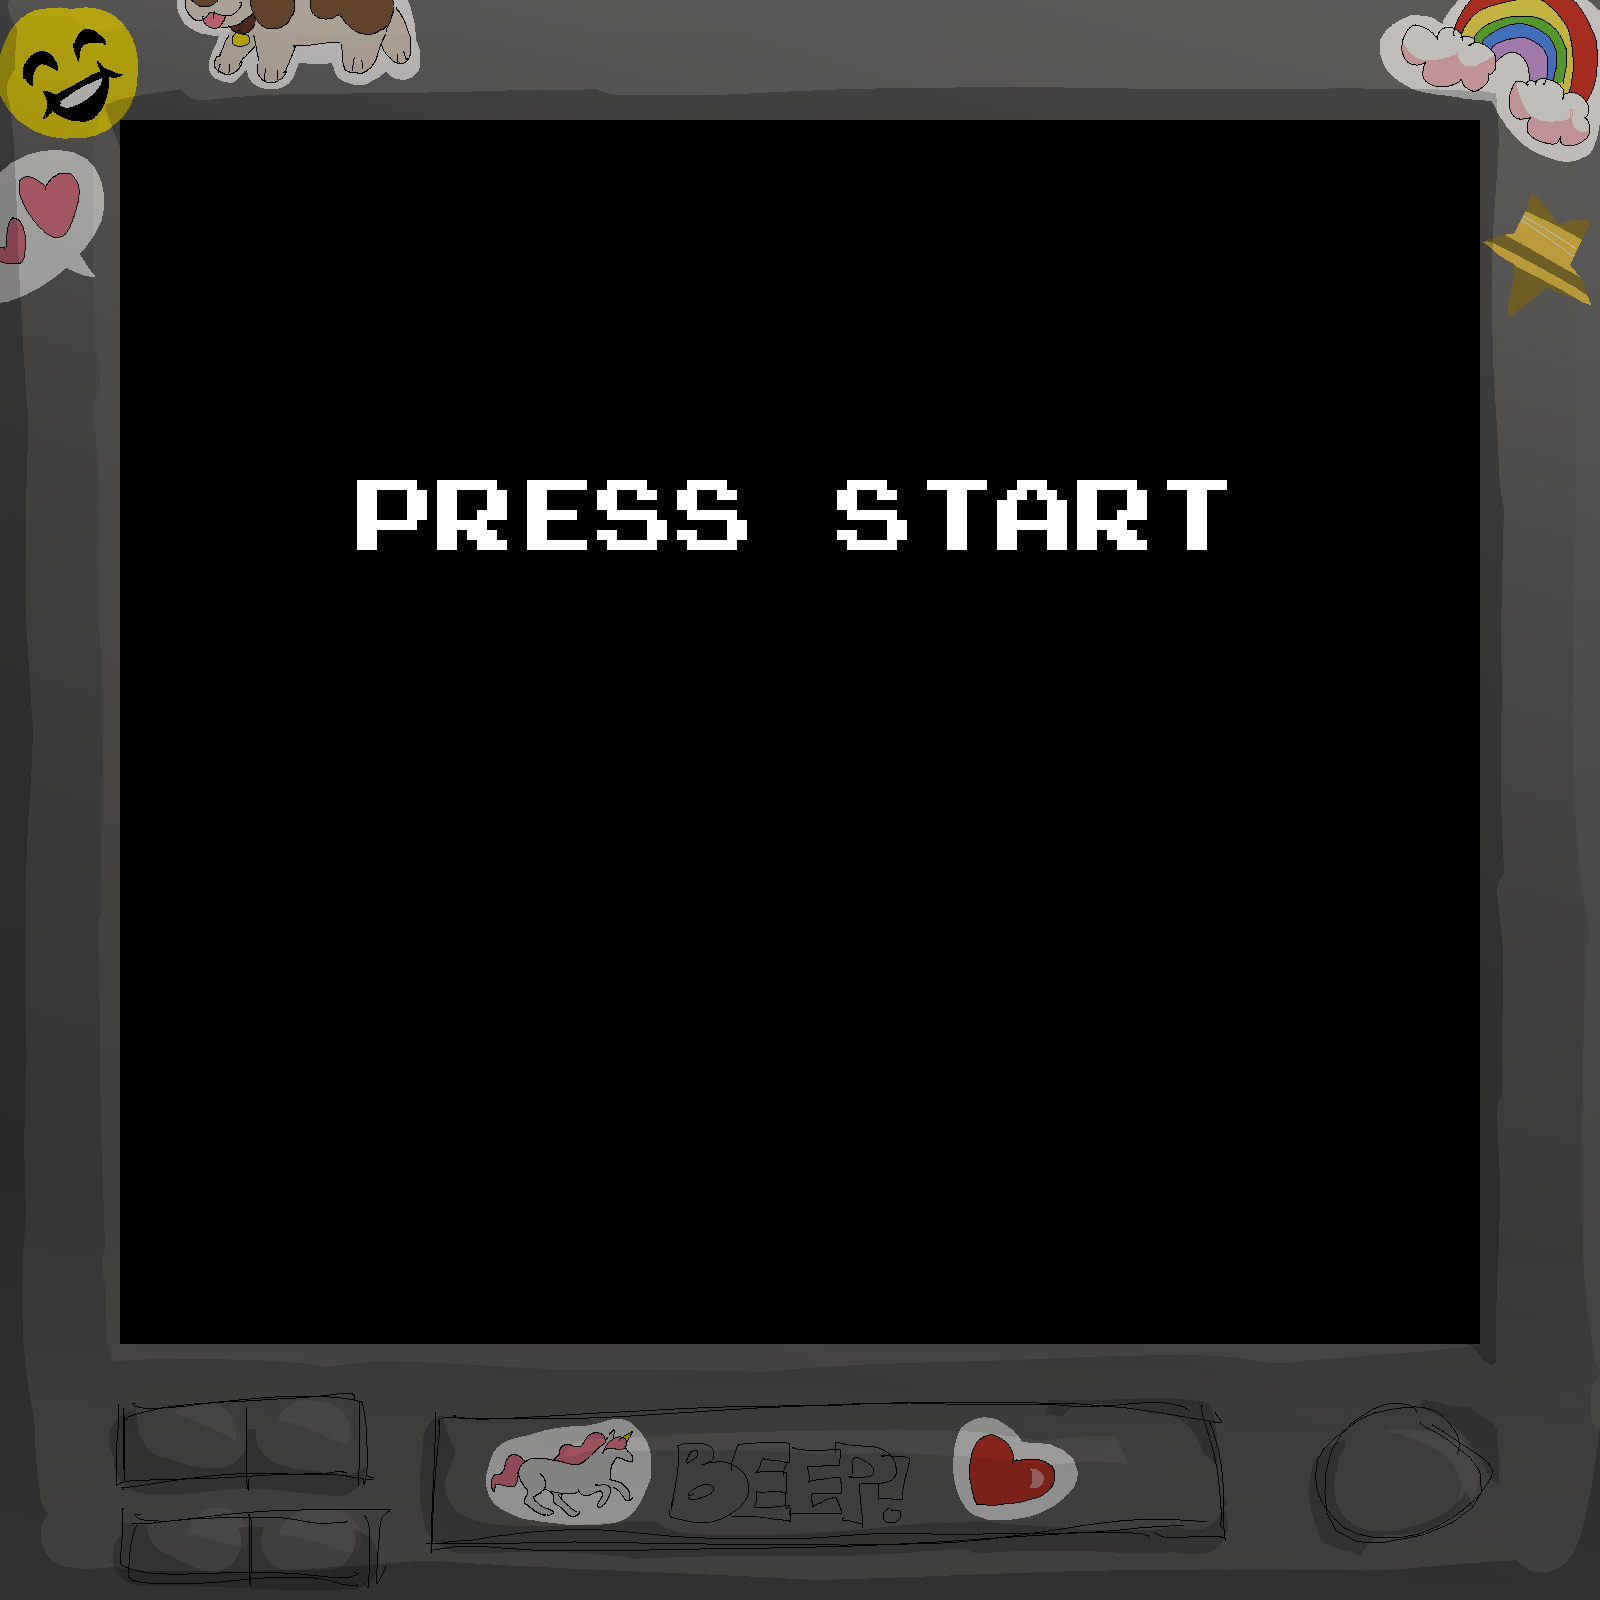 a screen with stickers around it. The screen says 'Press Start'.